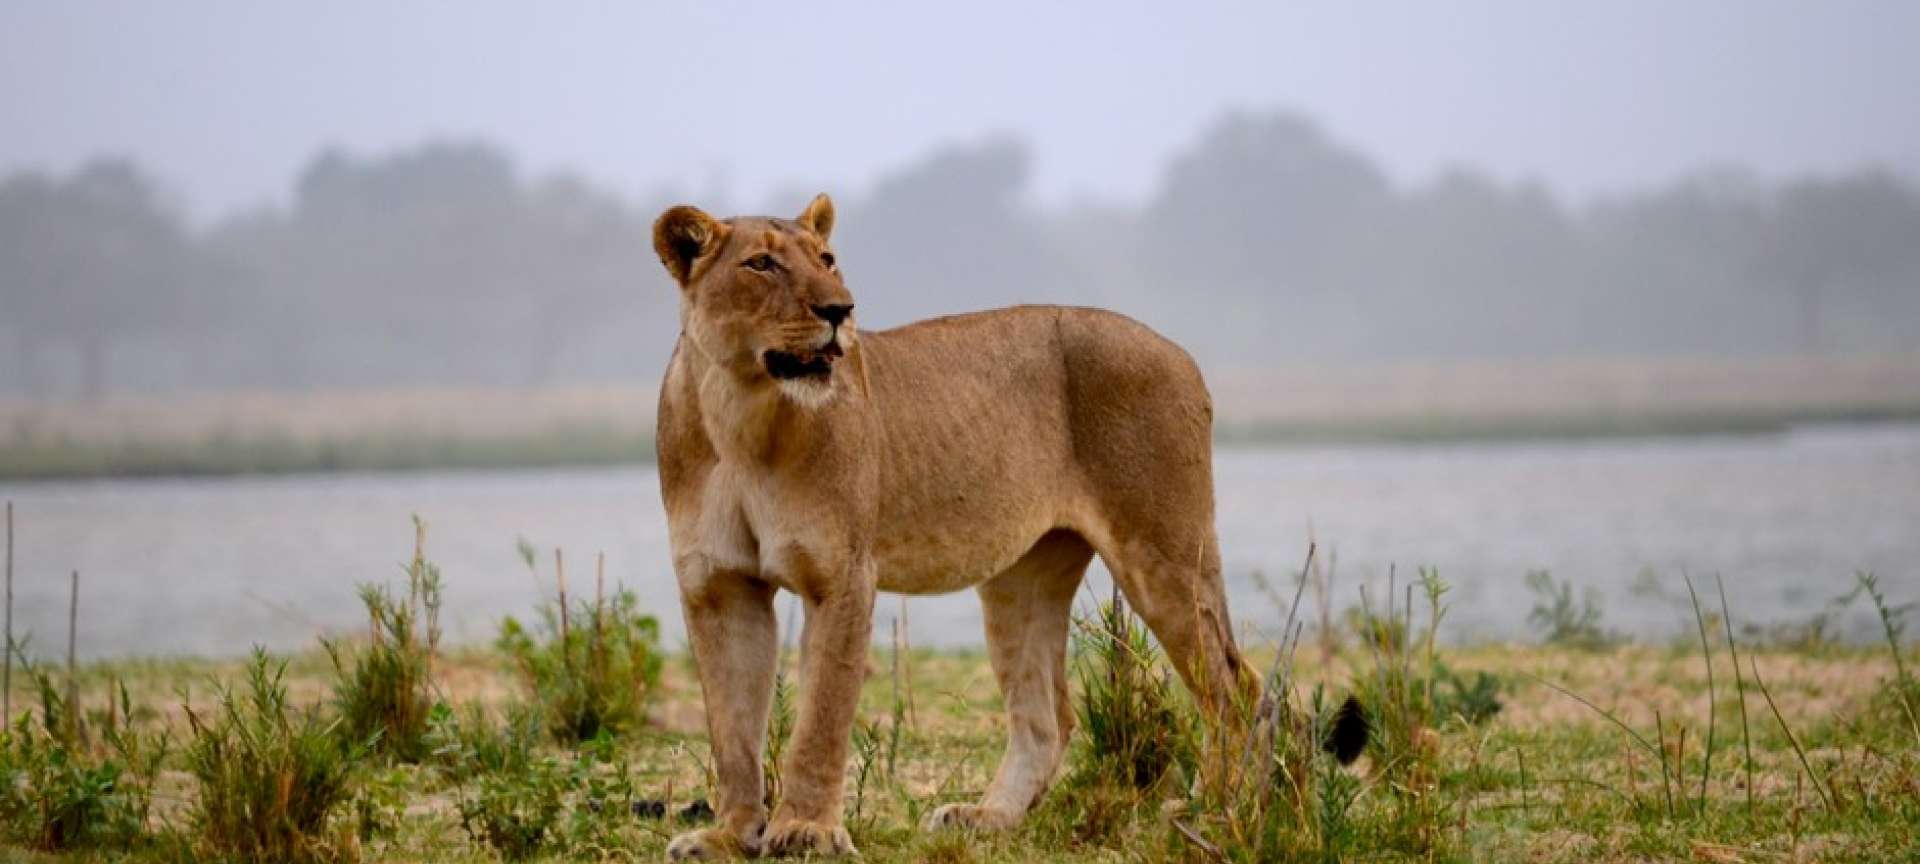 A lioness on the prowl in Lower Zambezi National Park